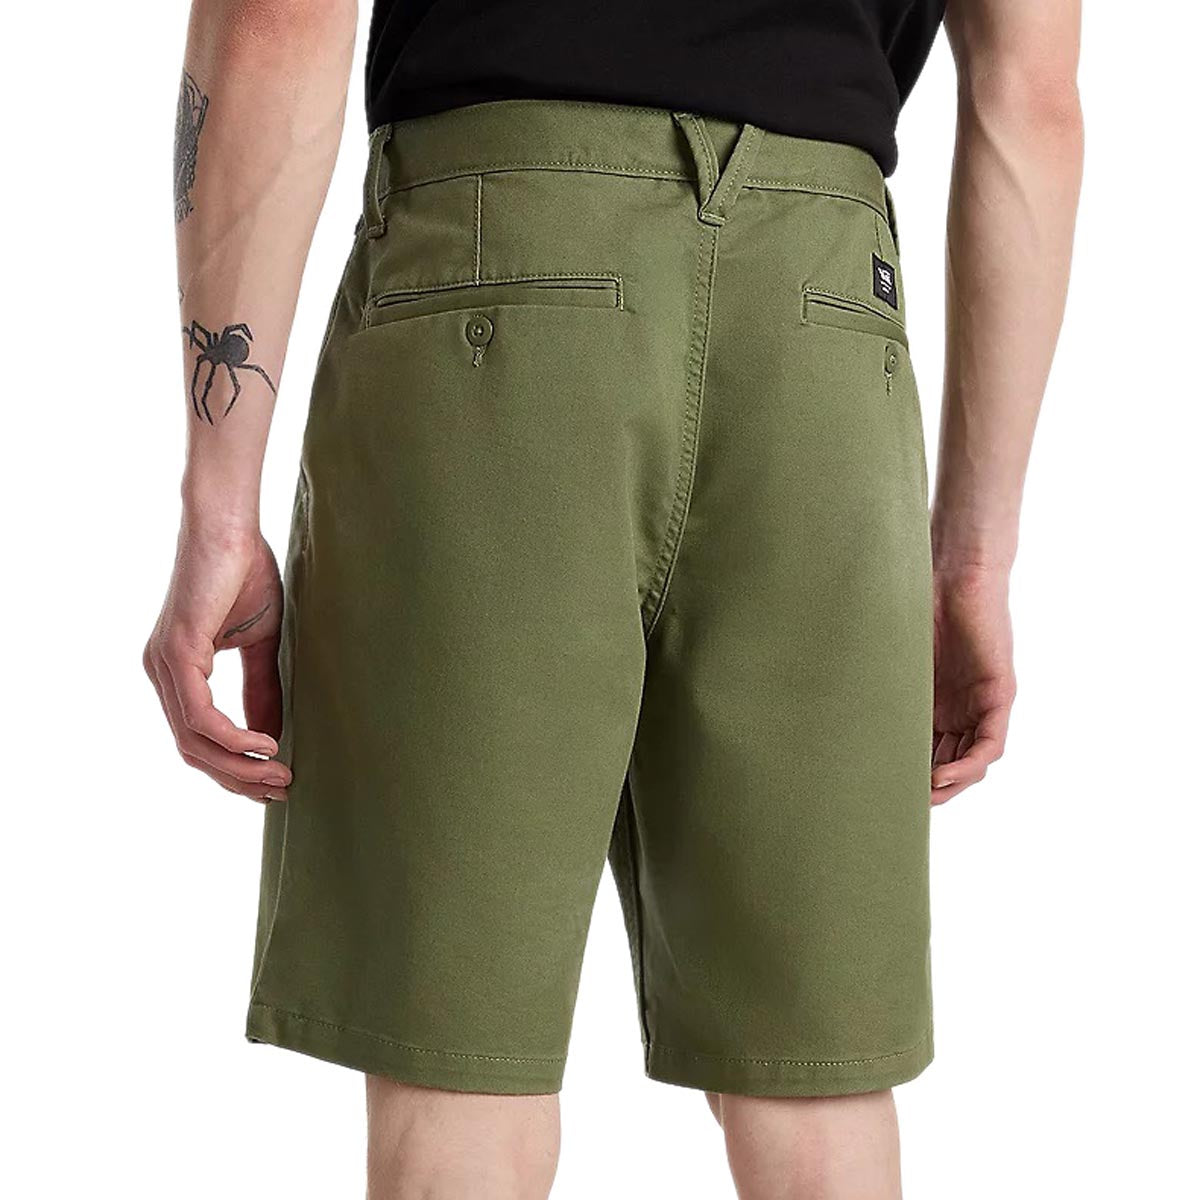 Vans Authentic Chino Relaxed Shorts - Olivine image 4